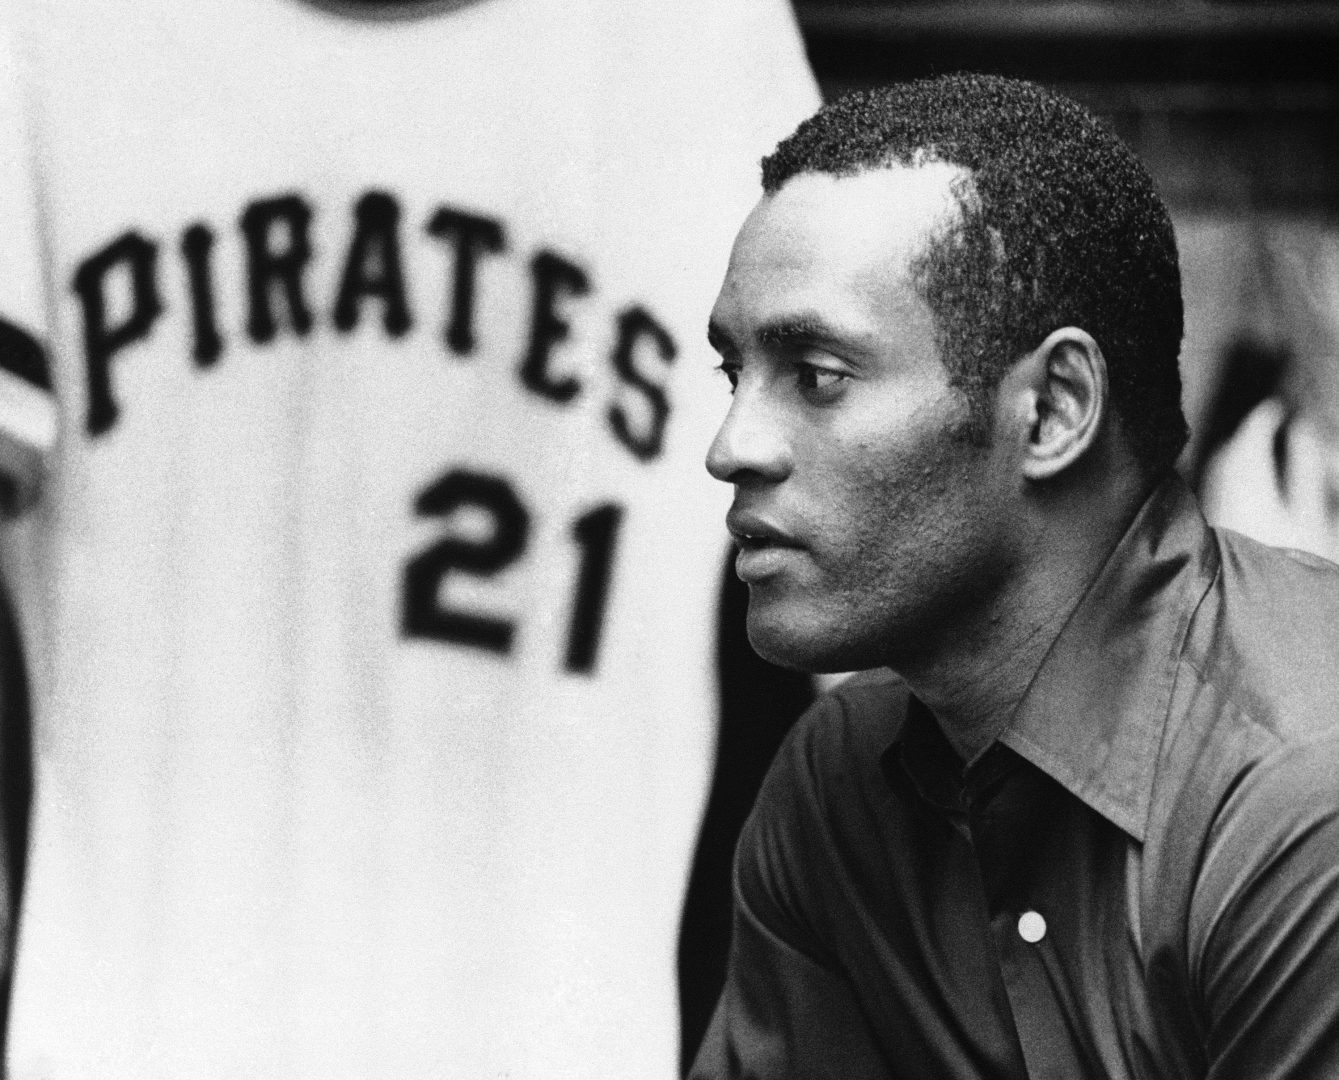 Roberto Clemente honors pirates star